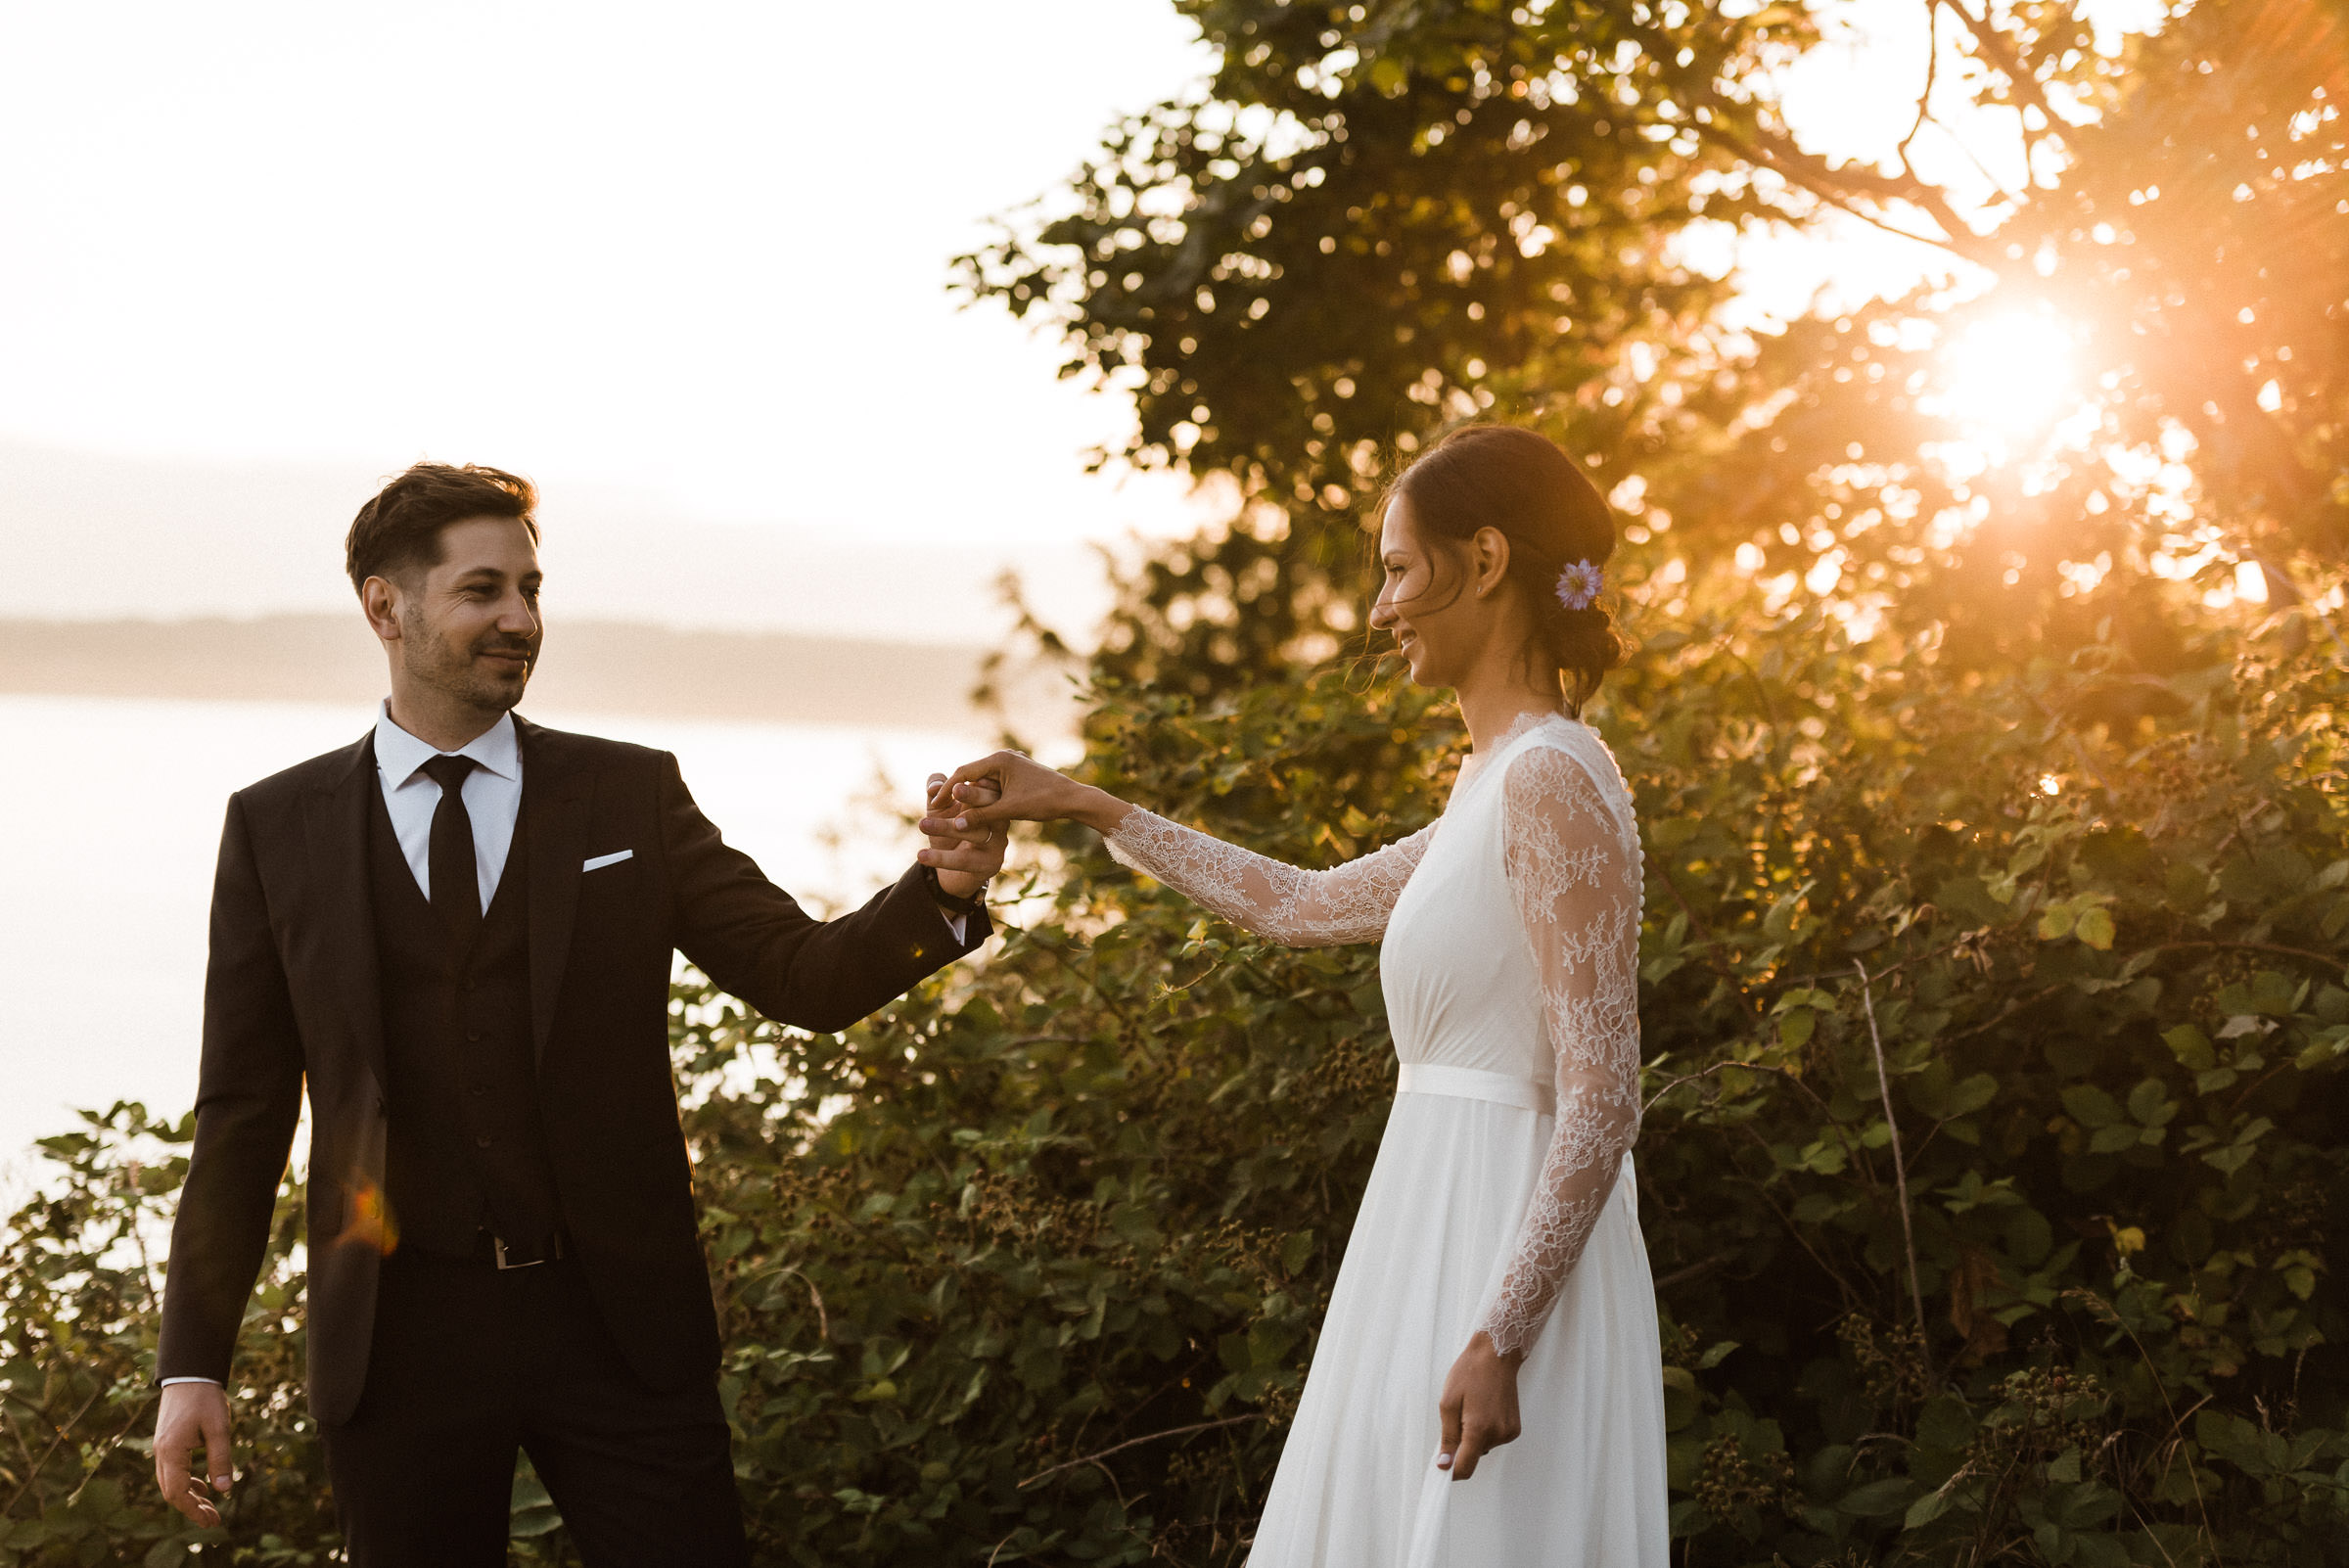 Wedding couple at sunset during a Discovery Park Seattle elopement.